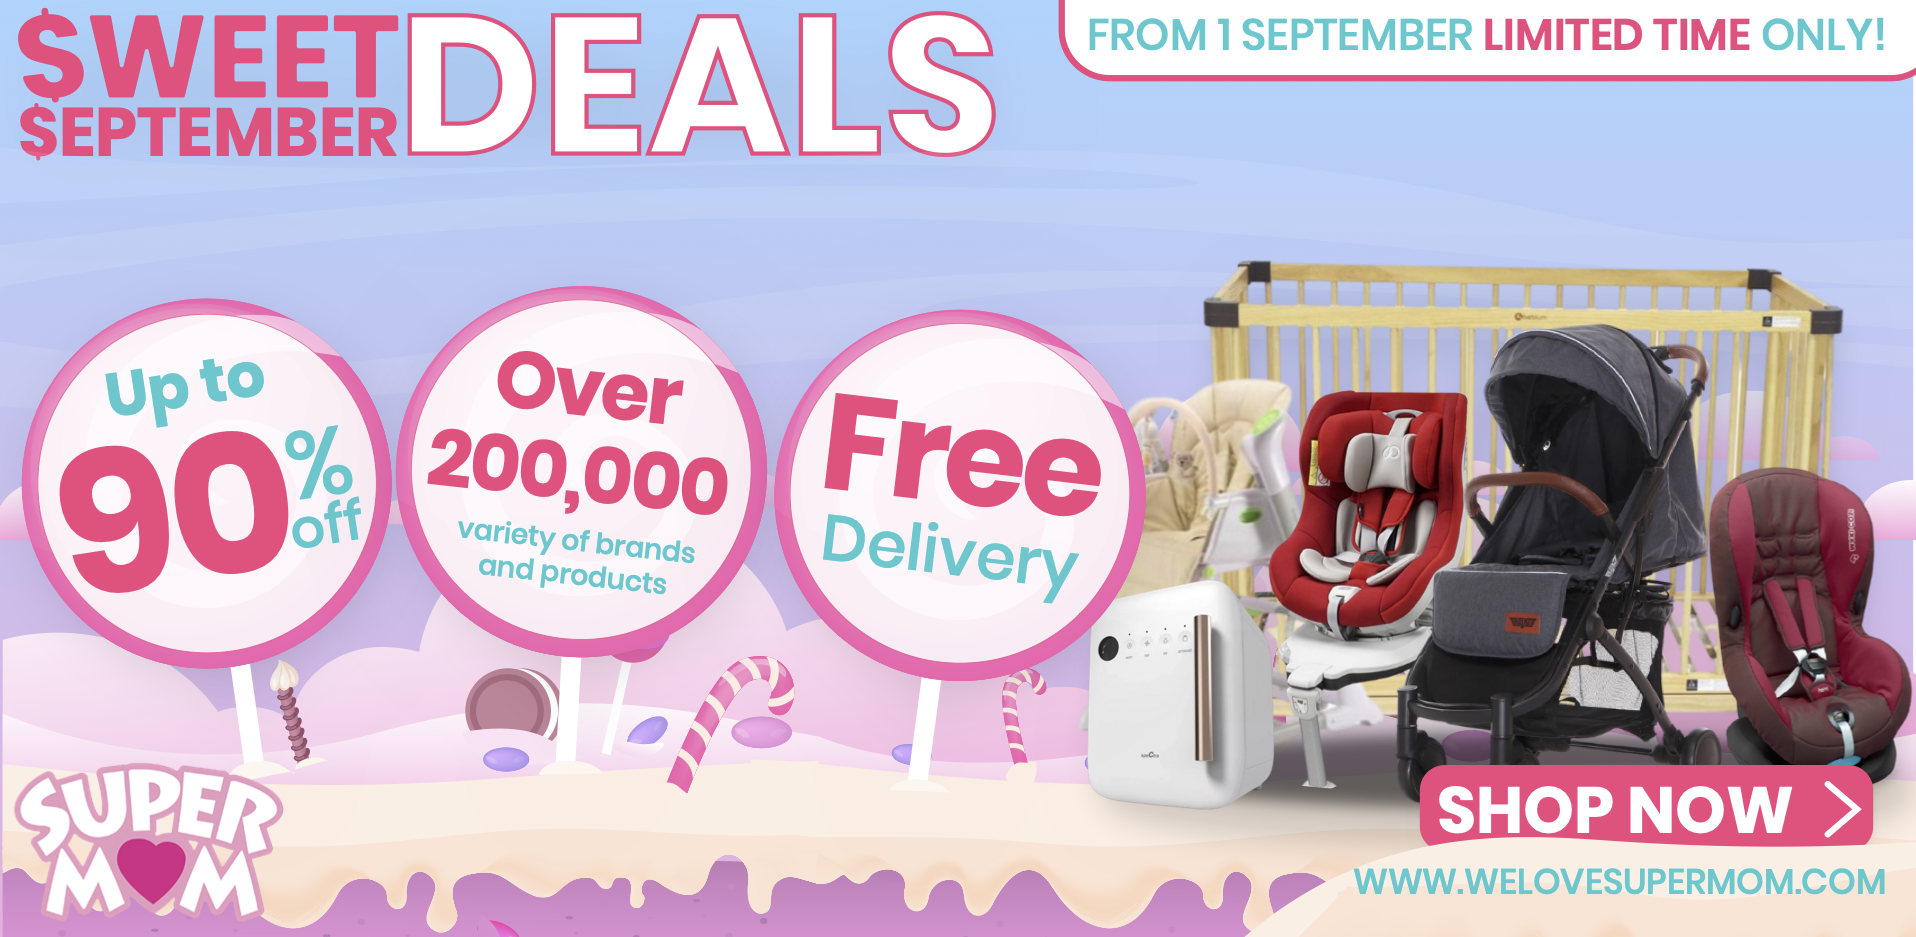 Supermom Post 9.9 Sales - FIVE DAYS ONLY, Singapore, Central, Singapore